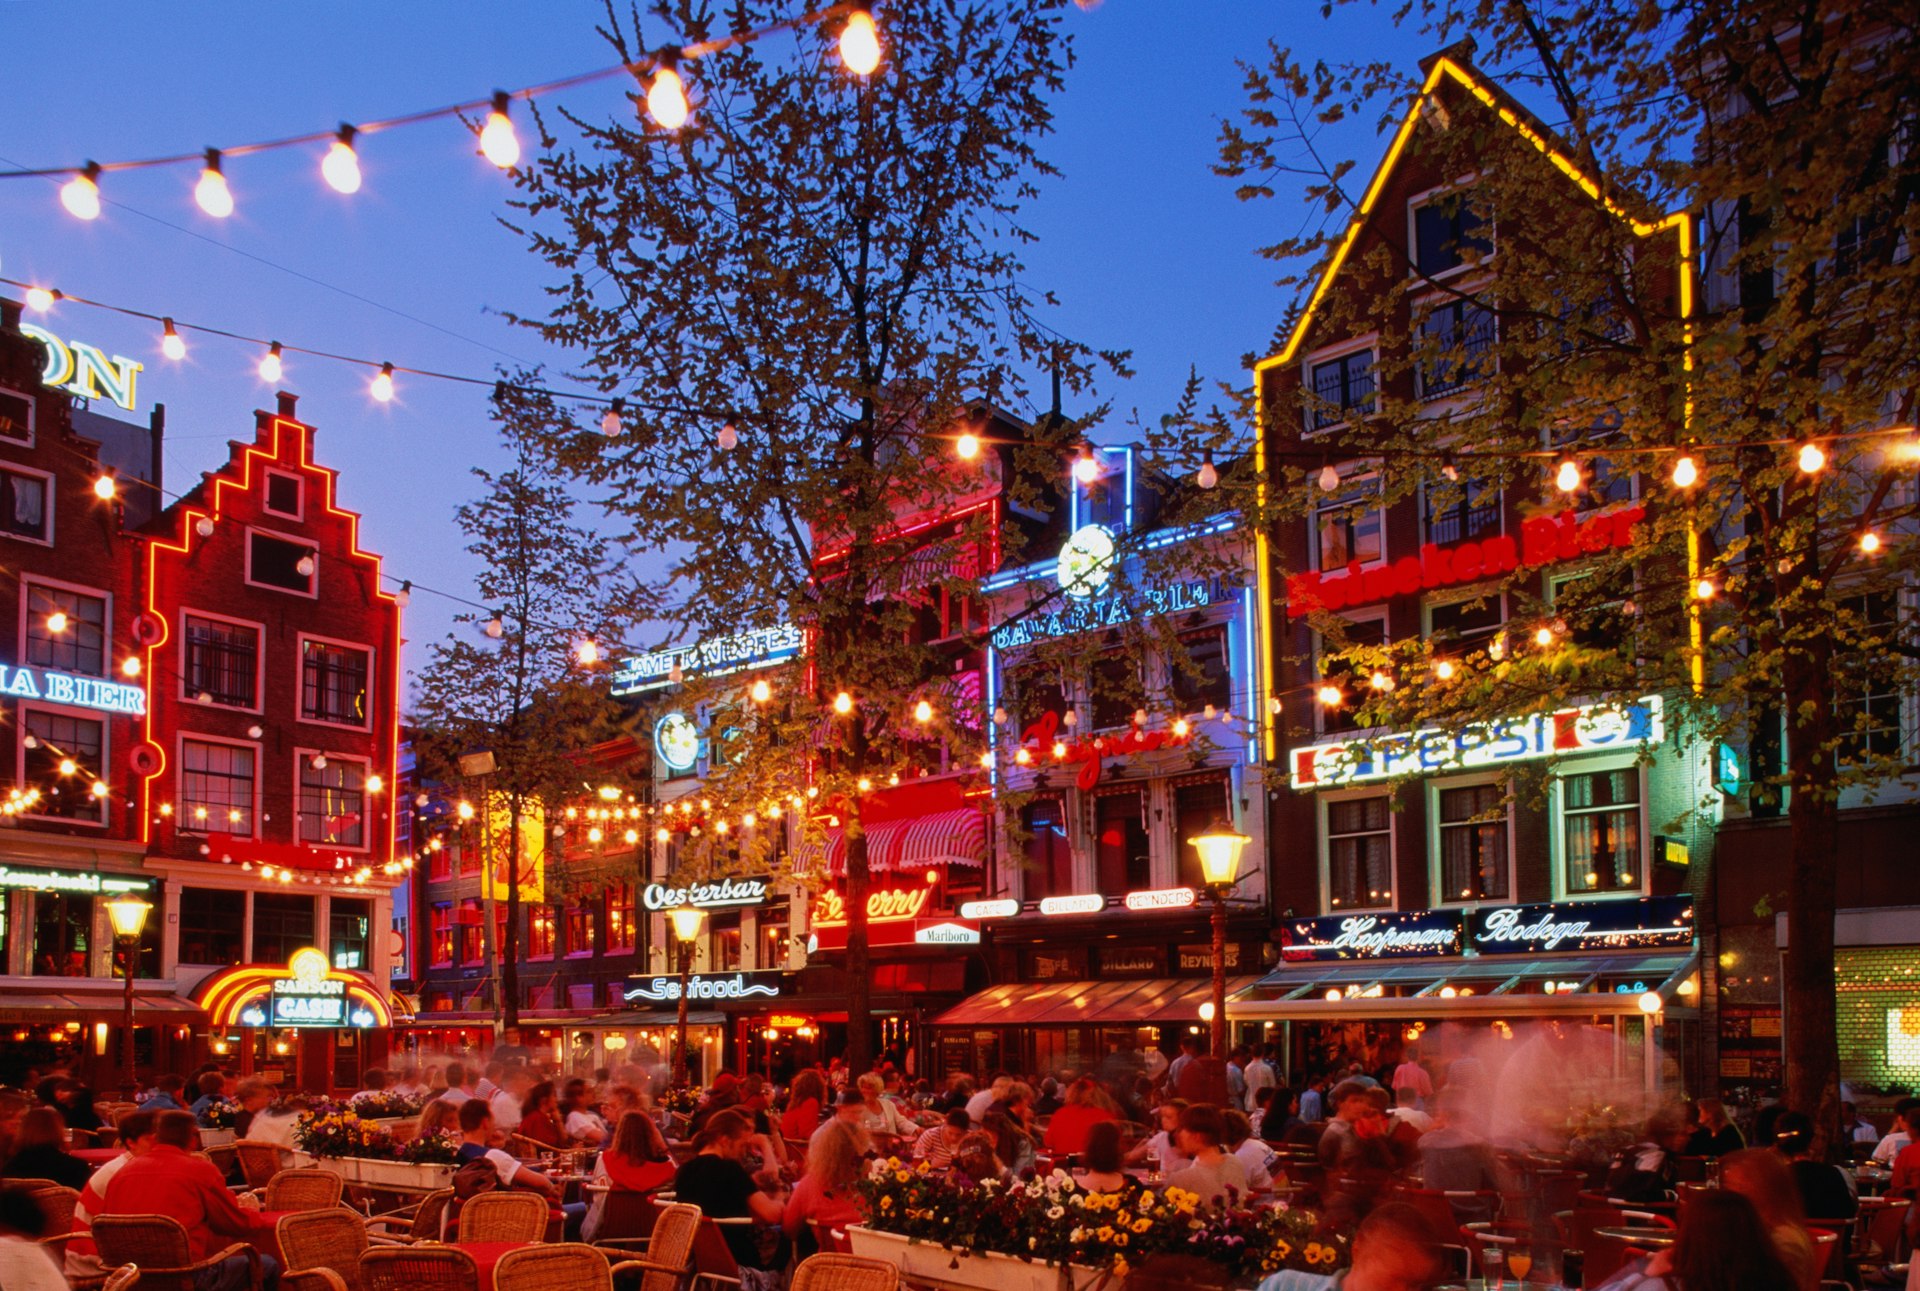 A crowded square in Leidseplein at nighttime. Tables and chairs, filled with people, occupy the square while fairy lights hang overhead and bars and restaurants line the walls around it.